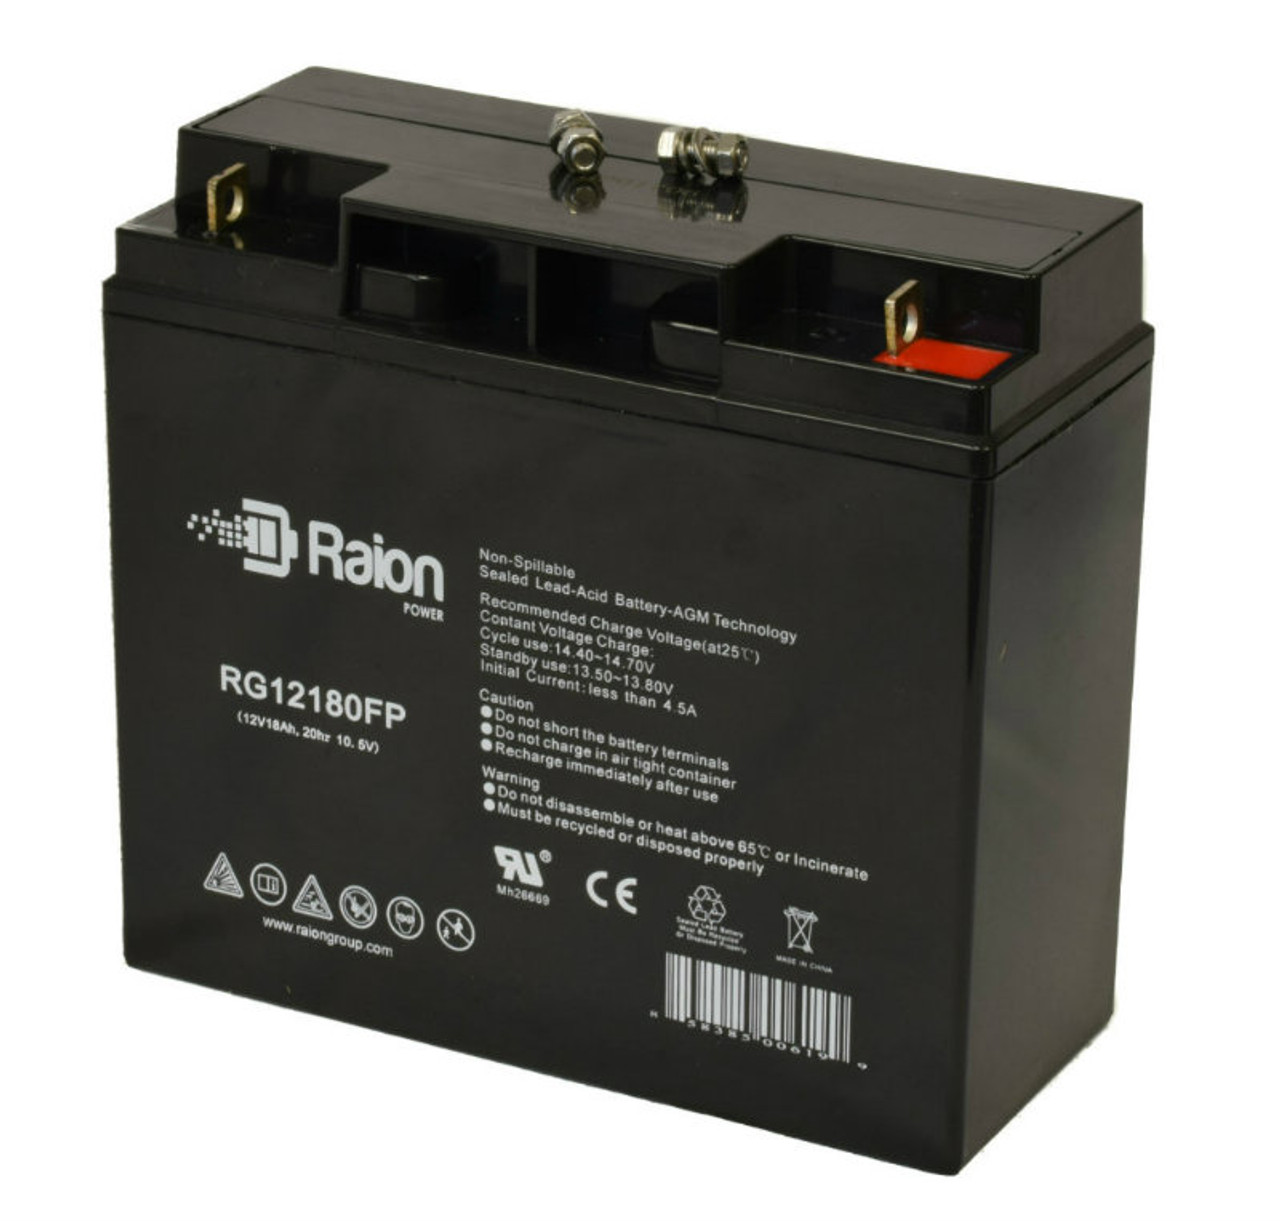 Raion Power Replacement RG12180FP Alarm Security System Battery for Altronix AL400ULACMJ